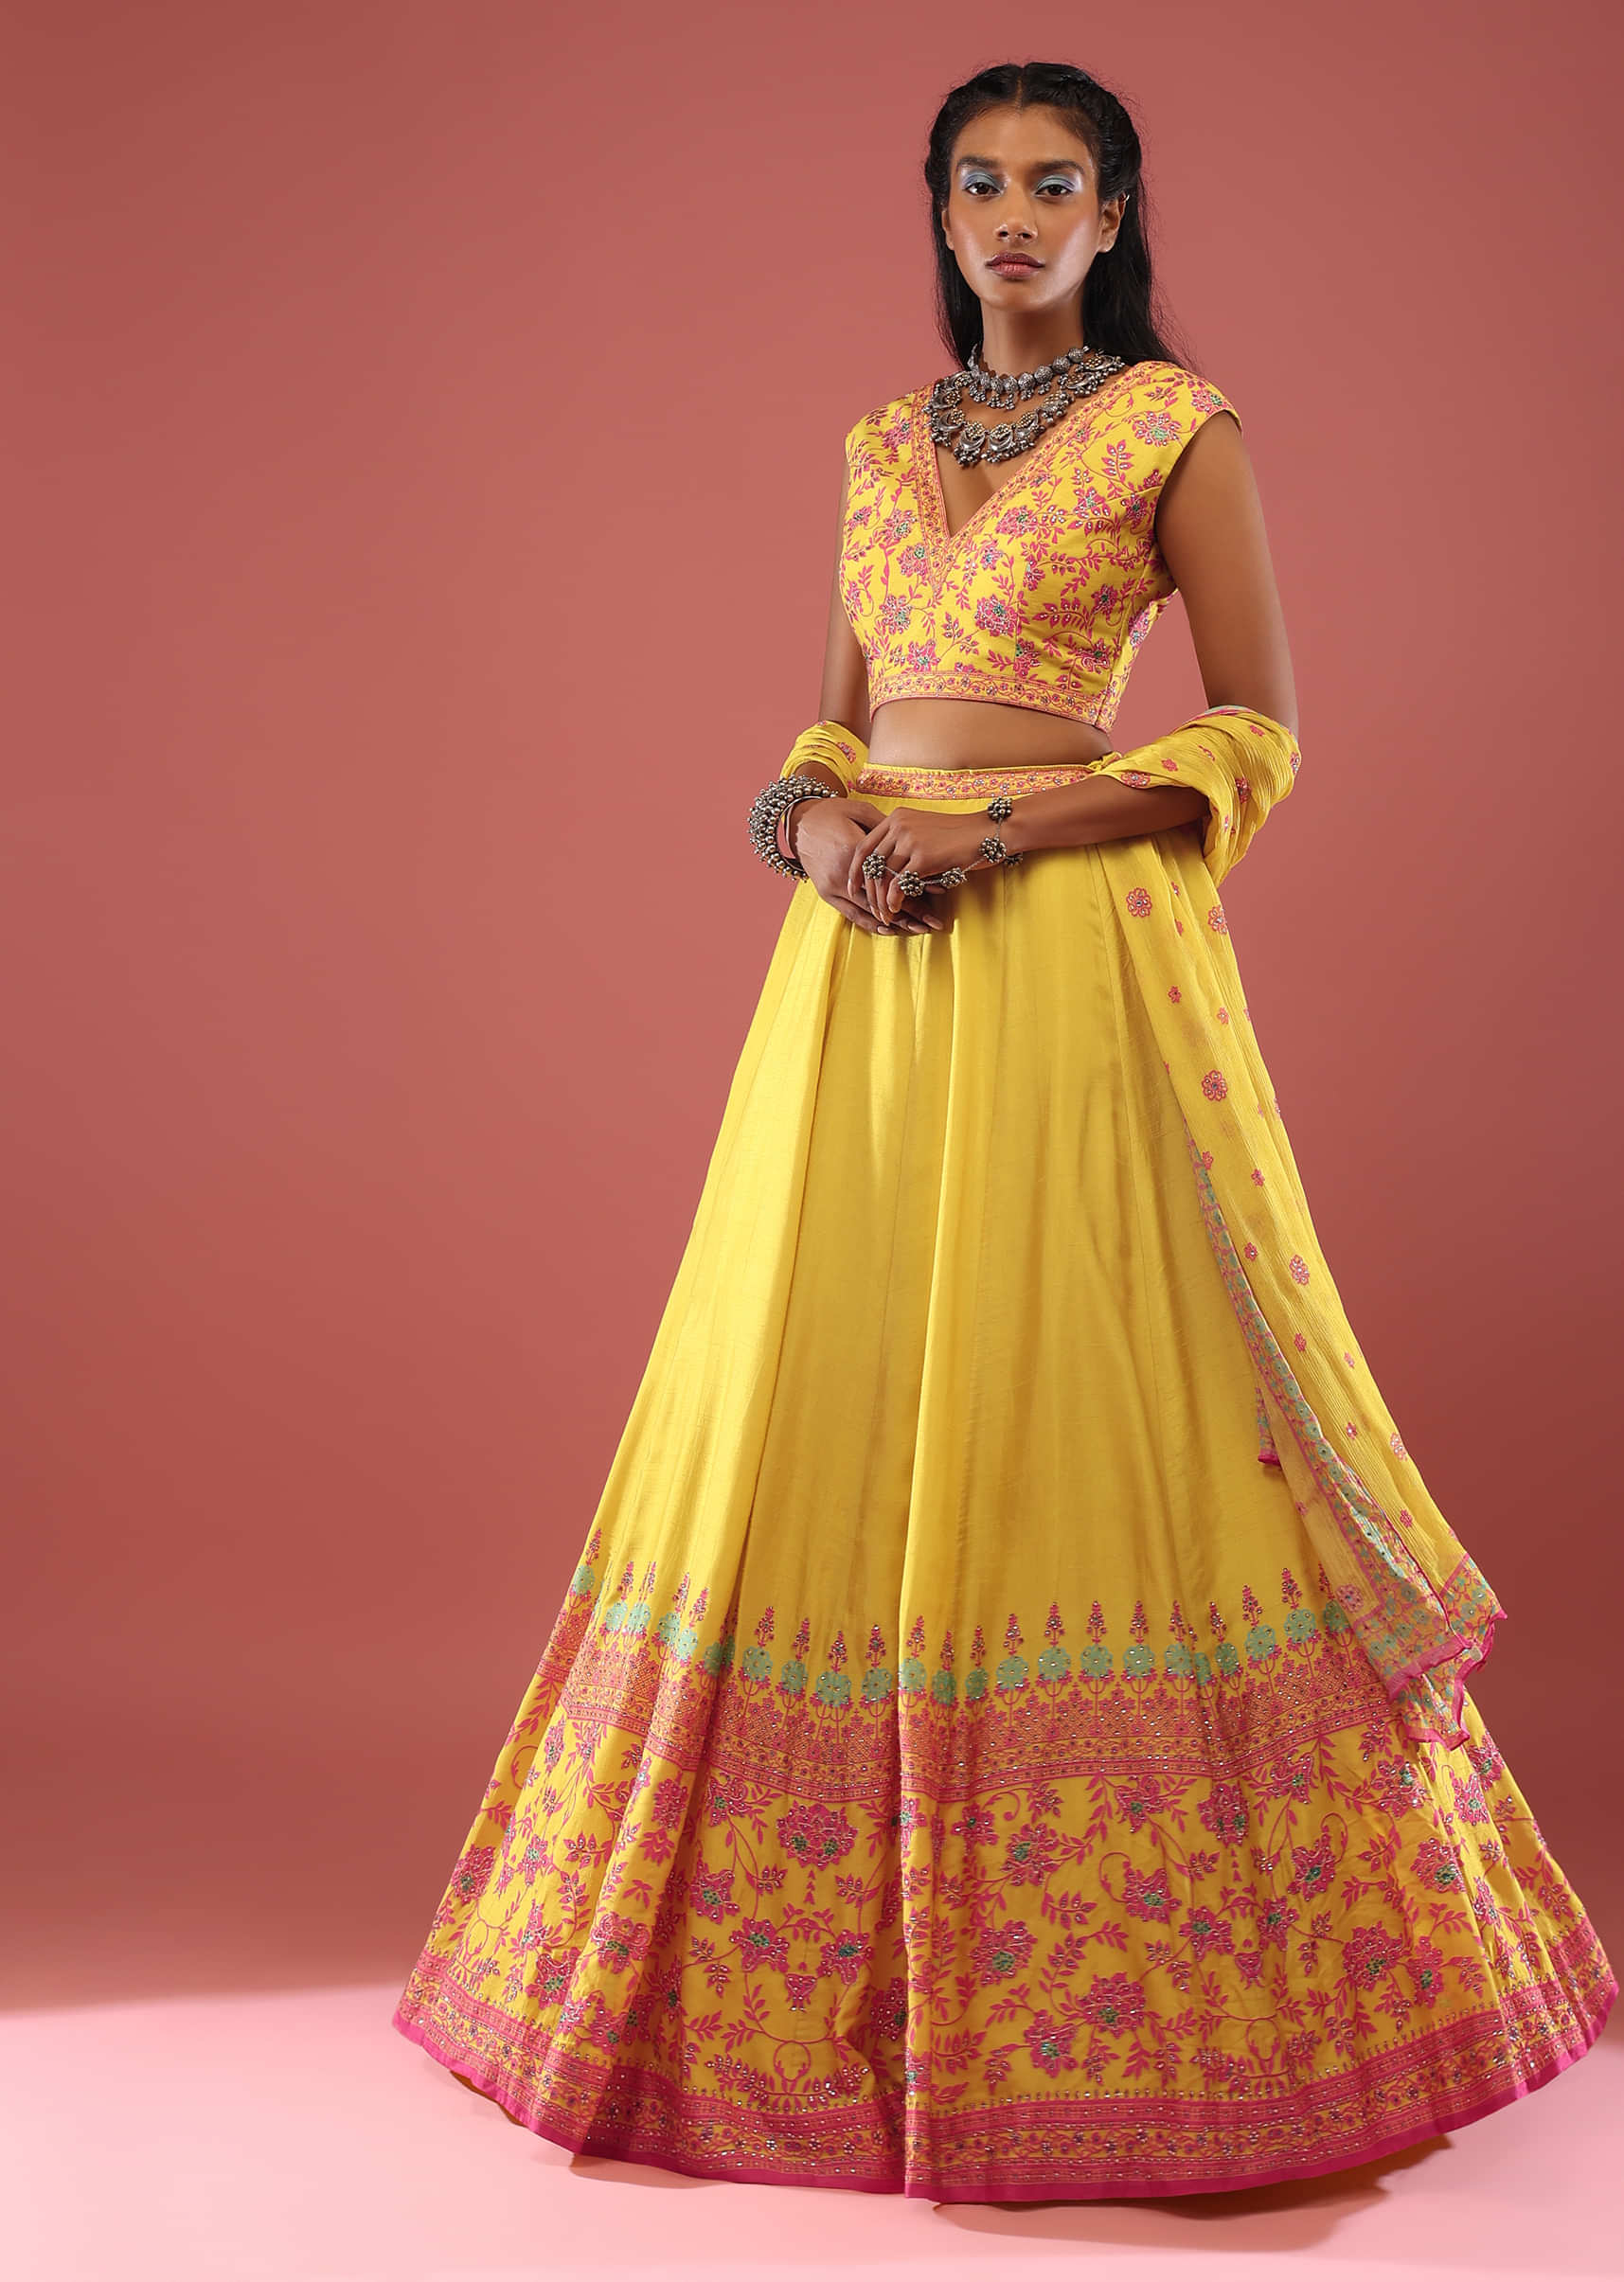 Canary Yellow Sleeveless Blouse With Colourful Stone Embellishments Paired With A Flowy Skirt